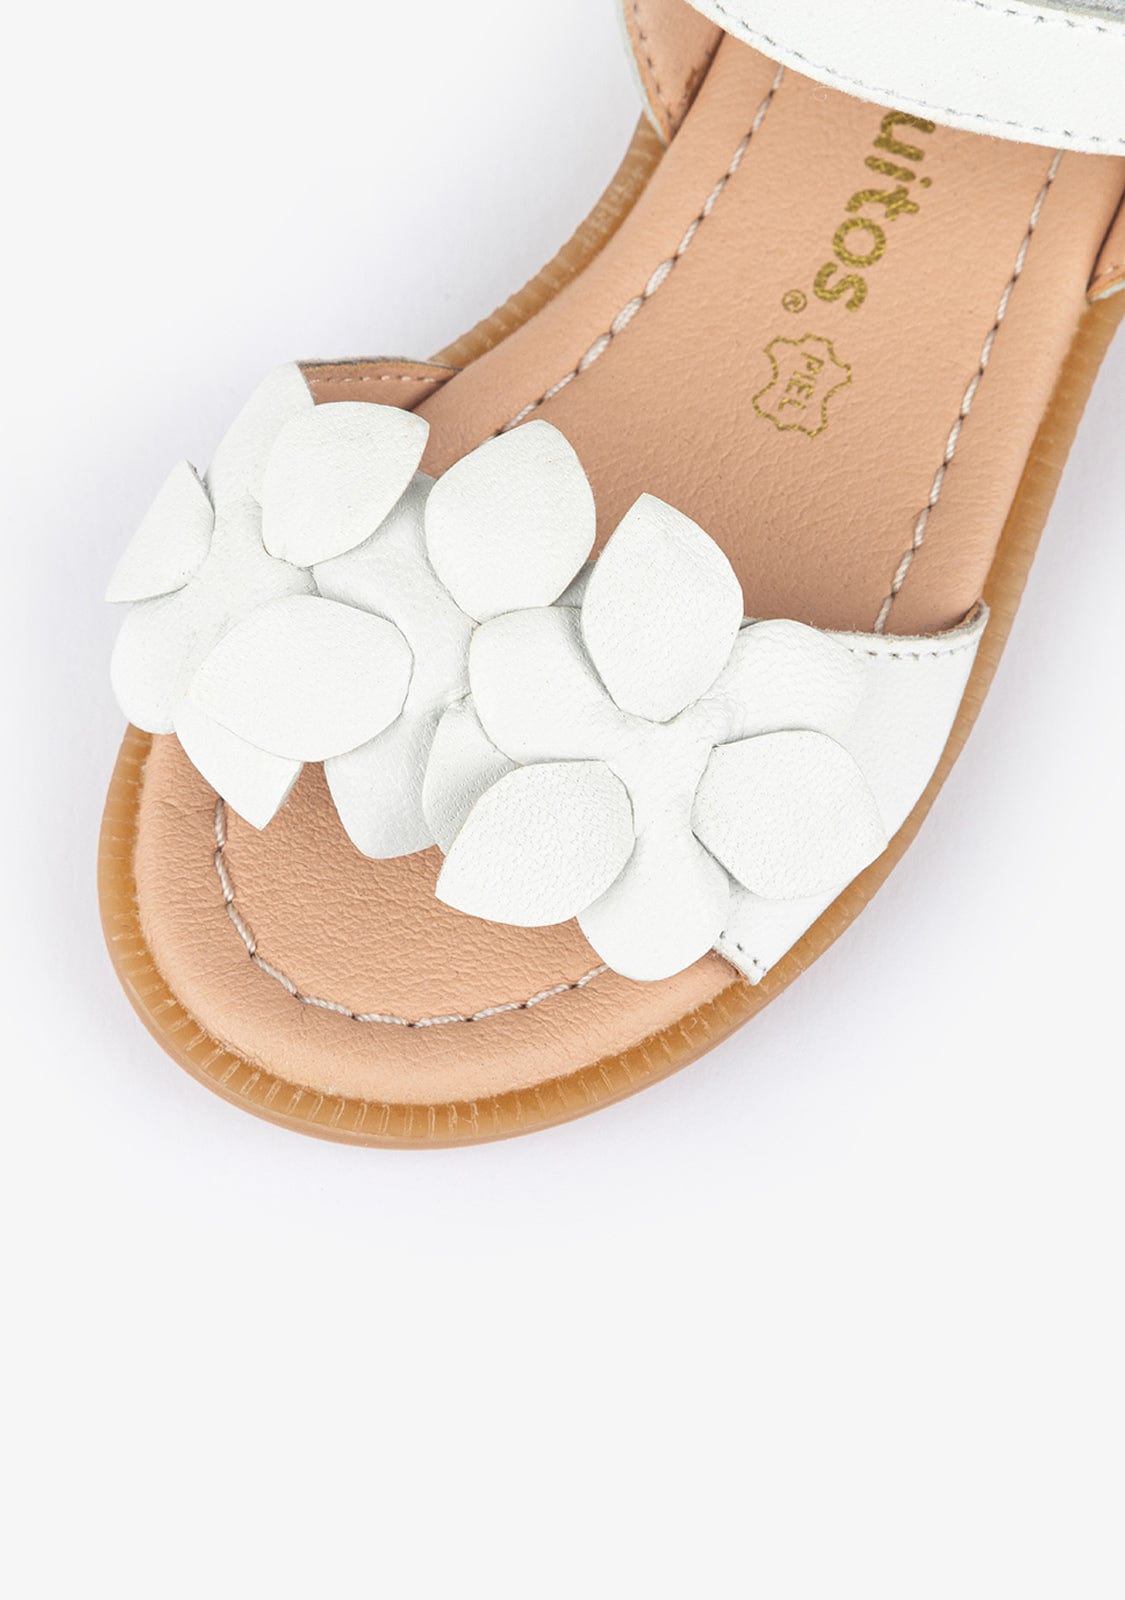 CONGUITOS Shoes Girl's Flowers White Leather Sandals